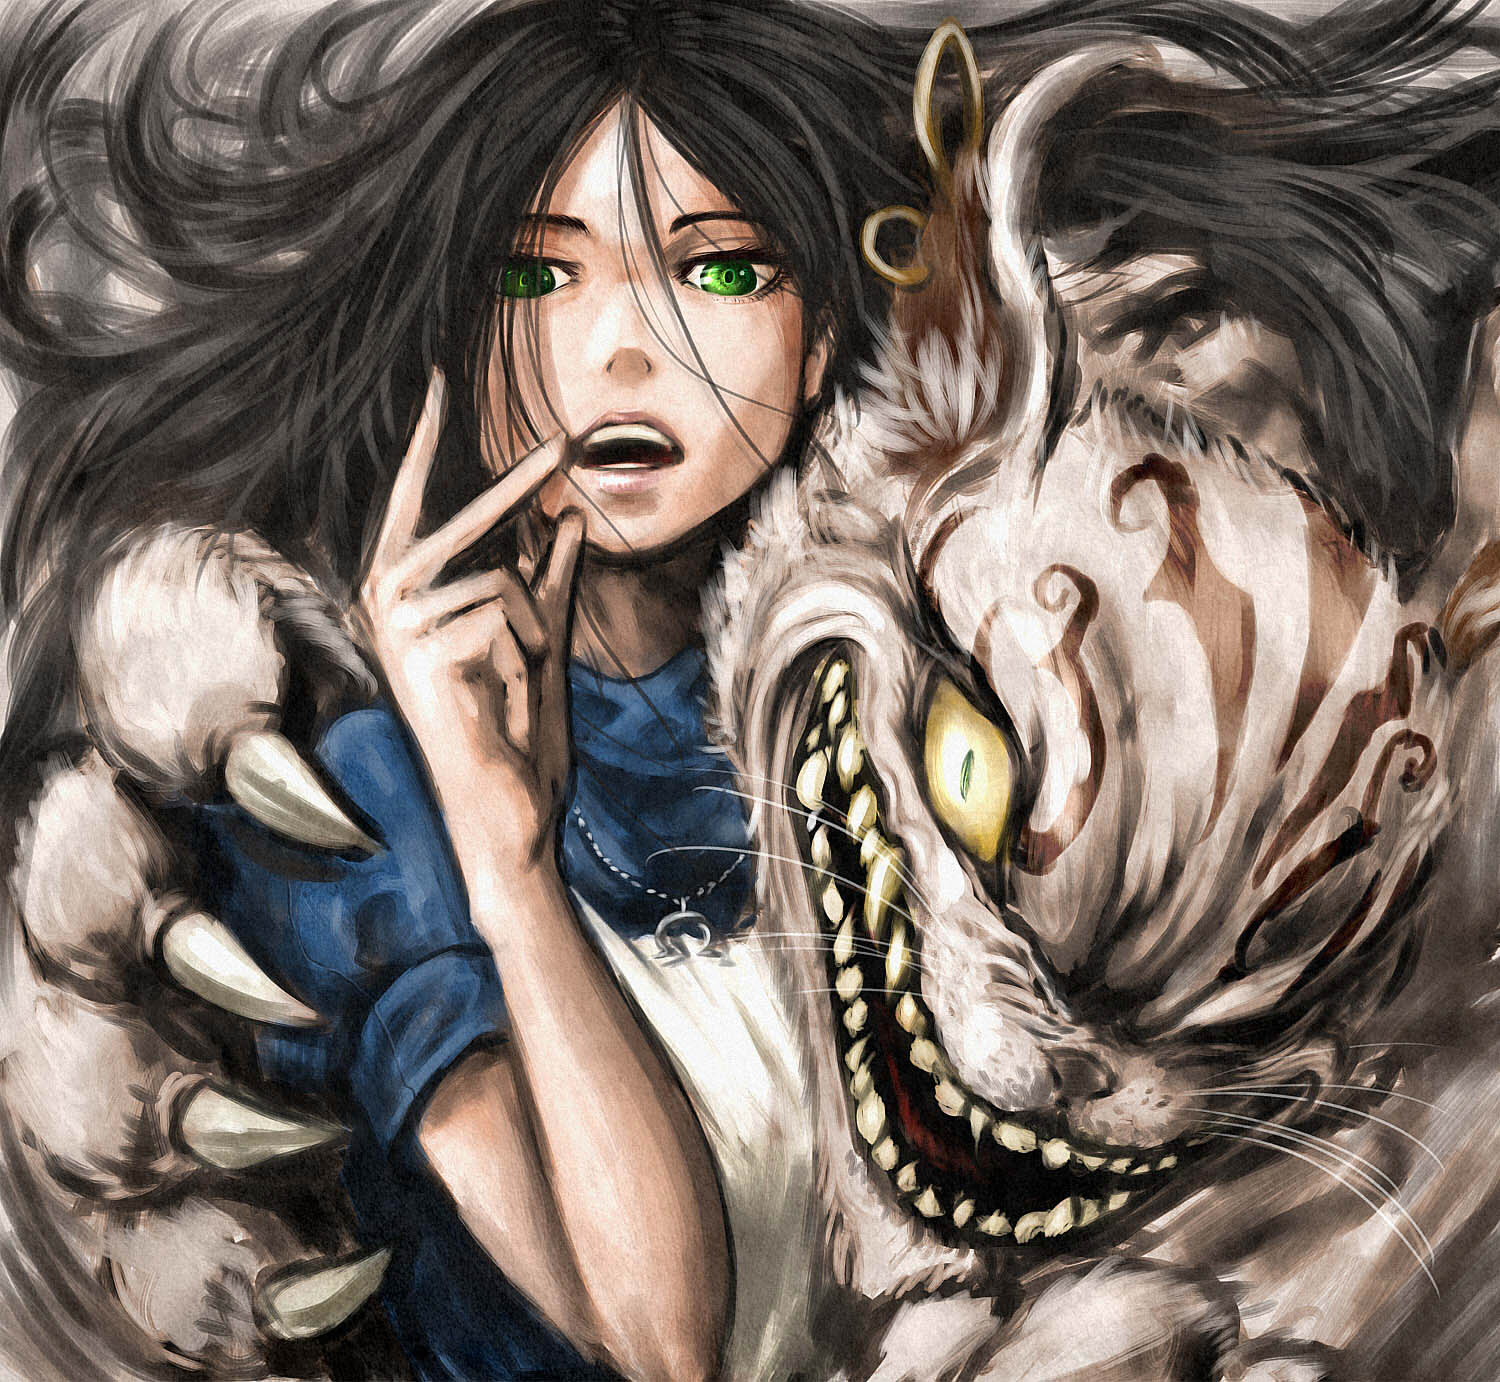 1girl alice:_madness_returns alice_(wonderland) alice_in_wonderland american_mcgee's_alice animal_ears apron black_hair cat_ears ceramic_man cheshire_cat dress earrings green_eyes highres jewelry long_hair looking_at_viewer necklace open_mouth smile